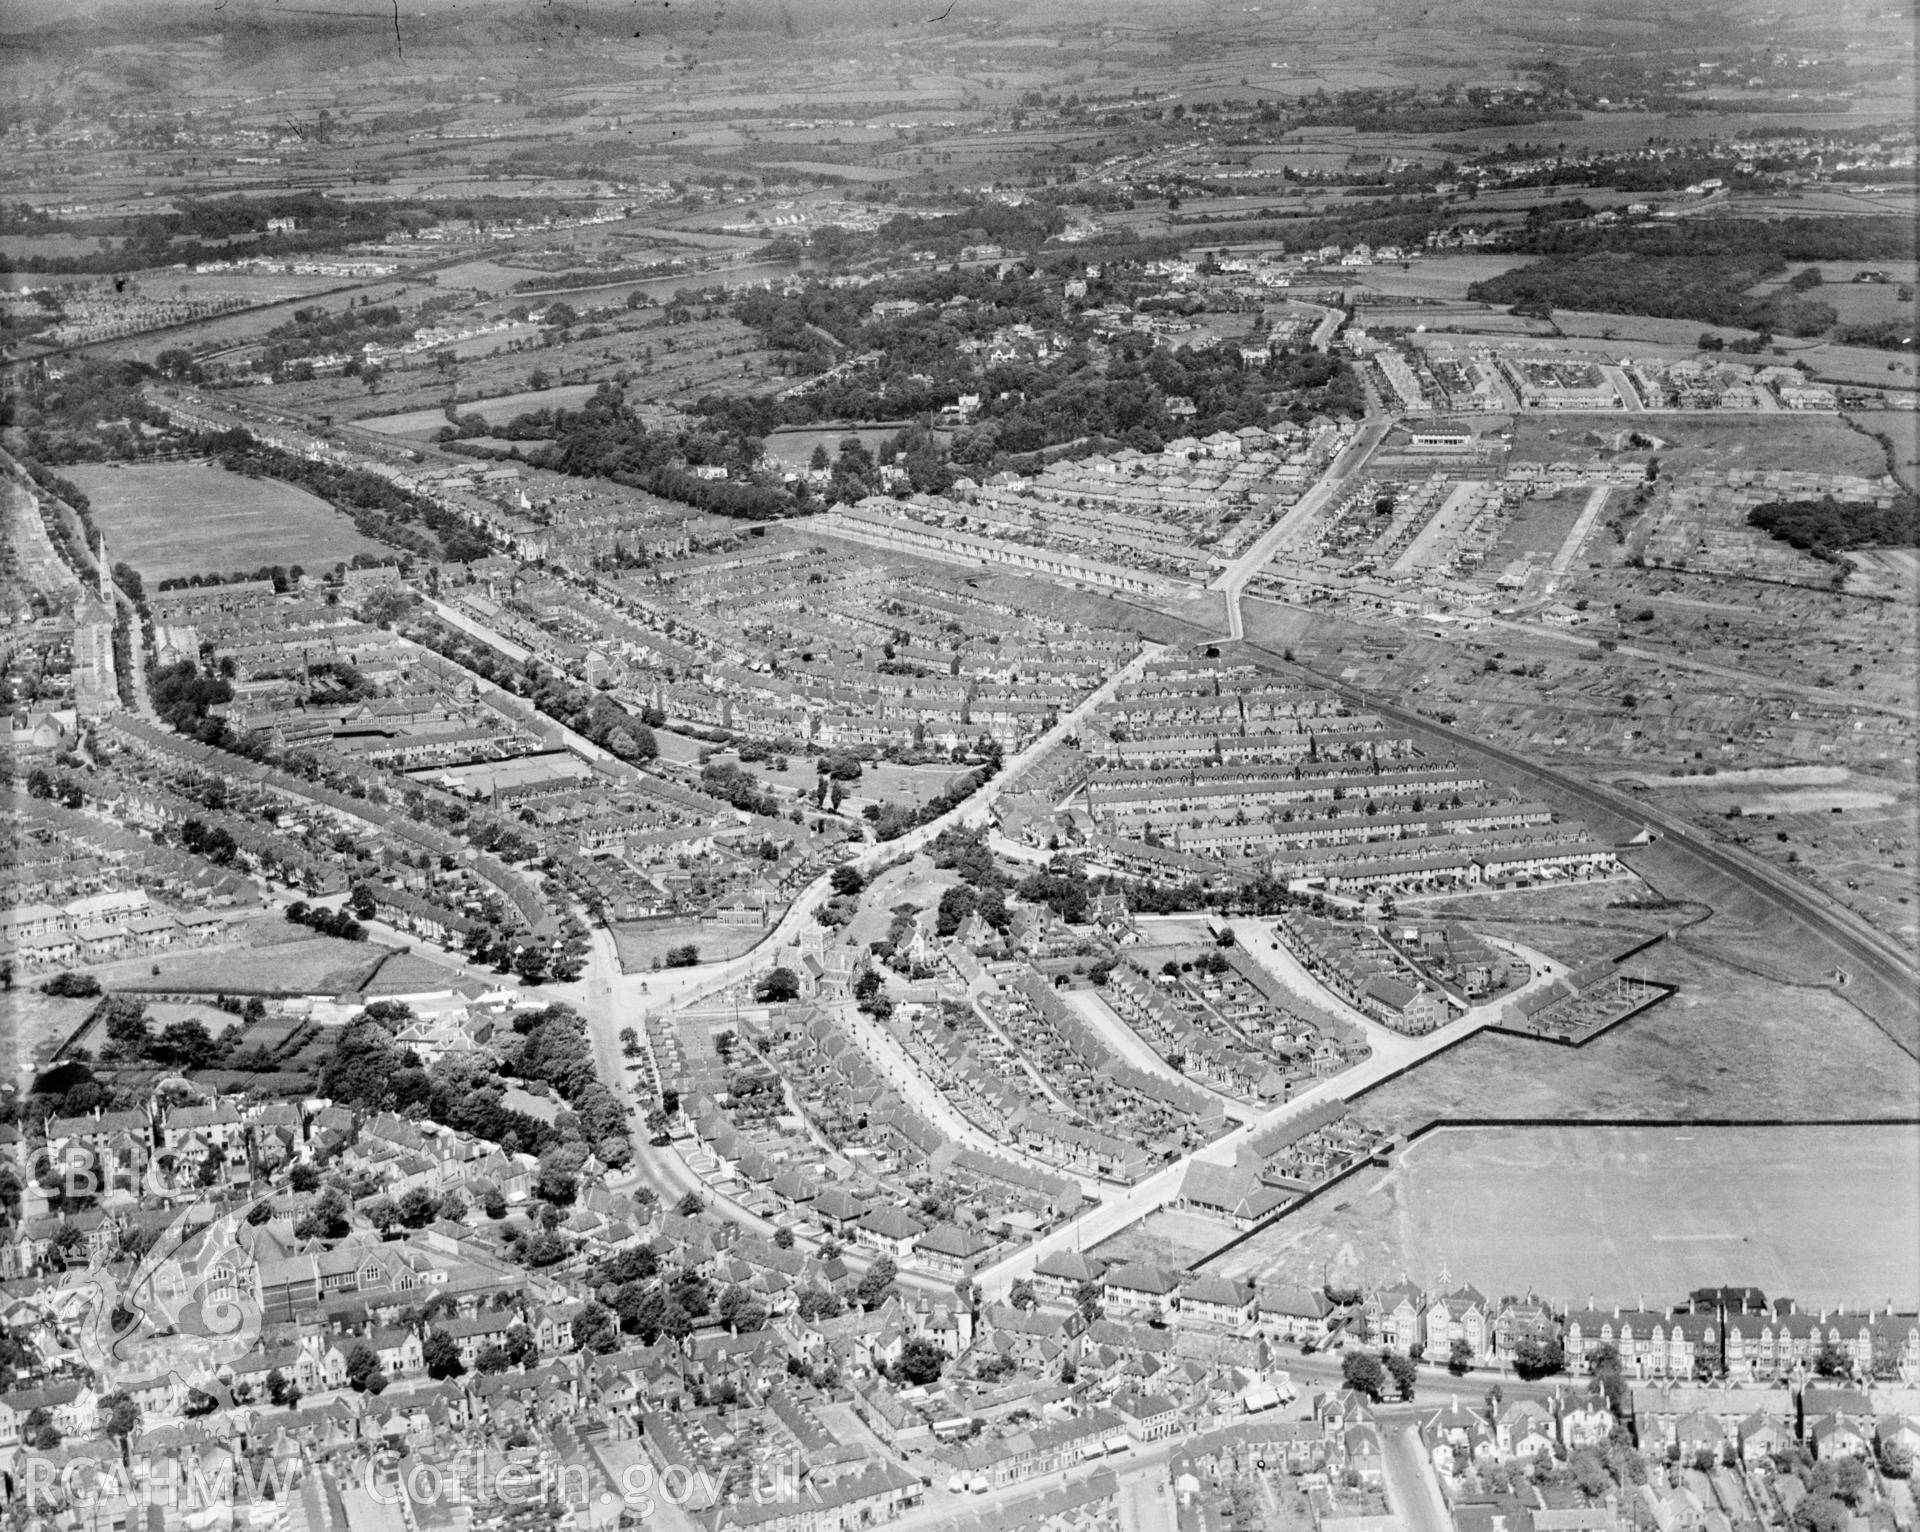 View of a residential area of Cardiff, oblique aerial view. 5?x4? black and white glass plate negative.